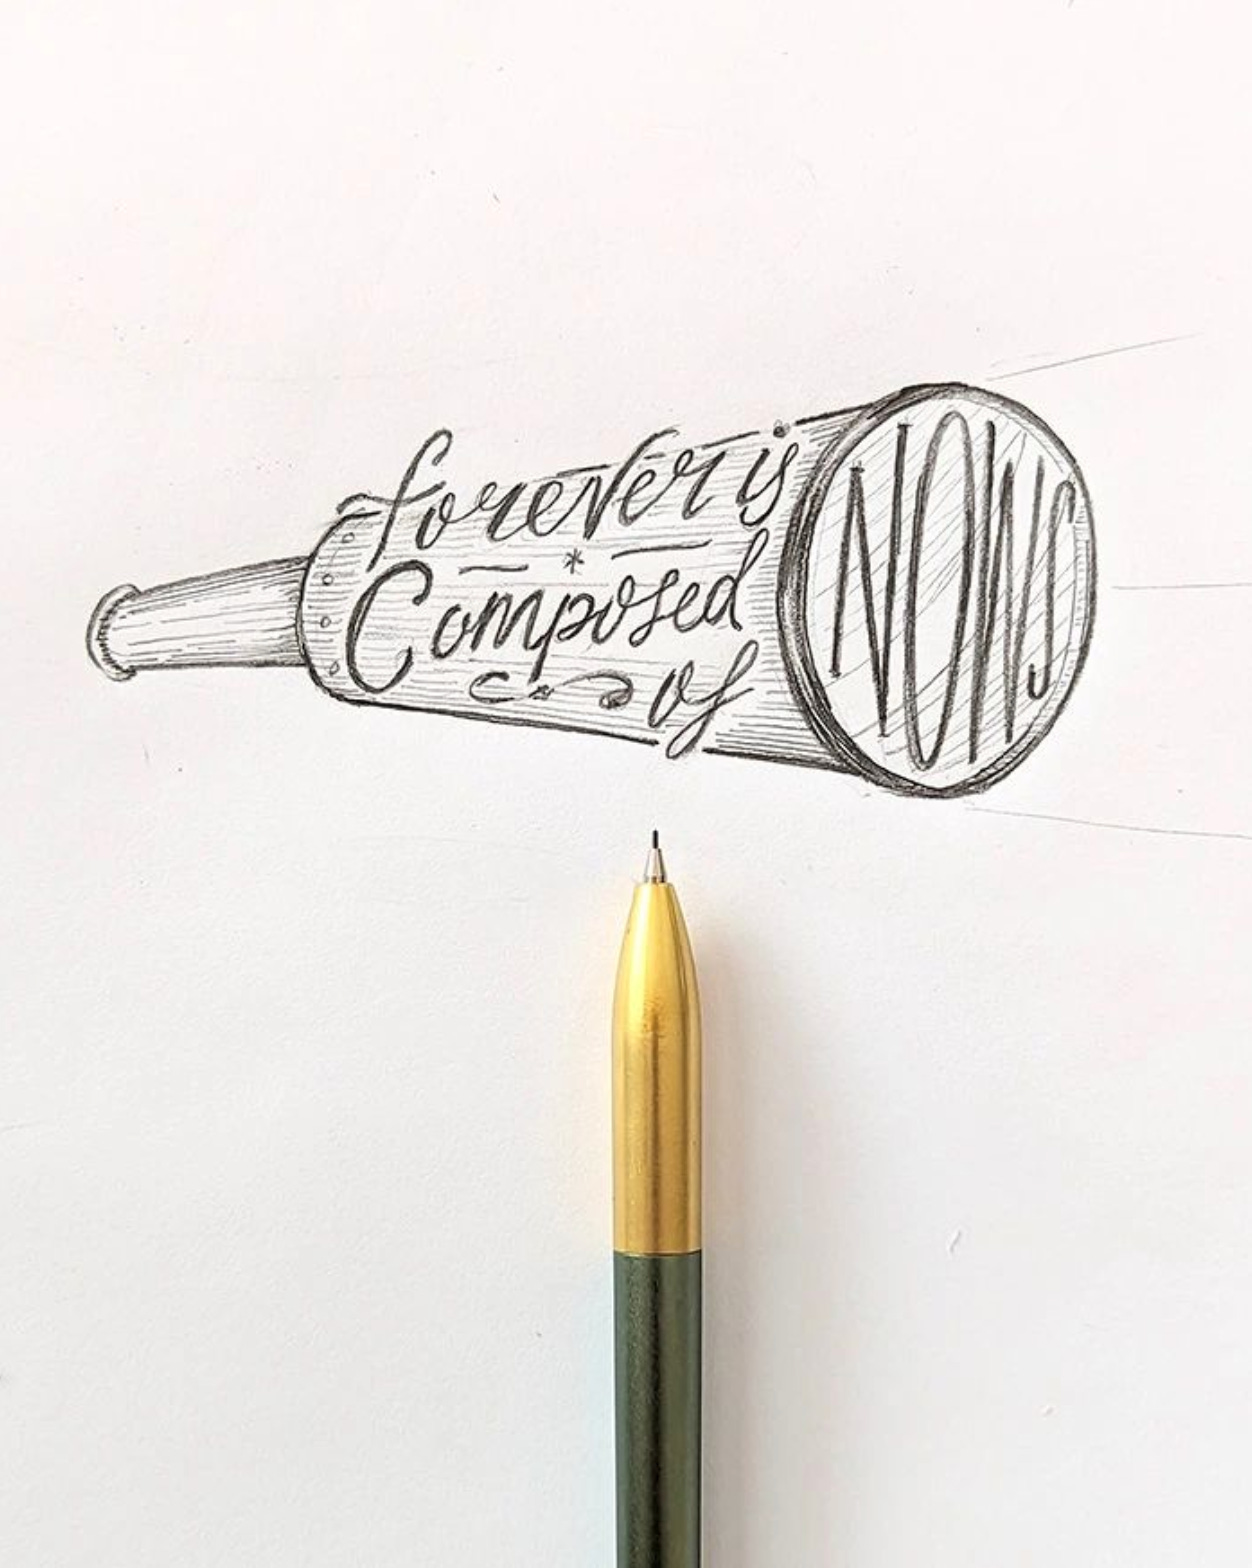 “Forever is composed of nows” - Emily Dickinson | Creative Calligraphy Challenge